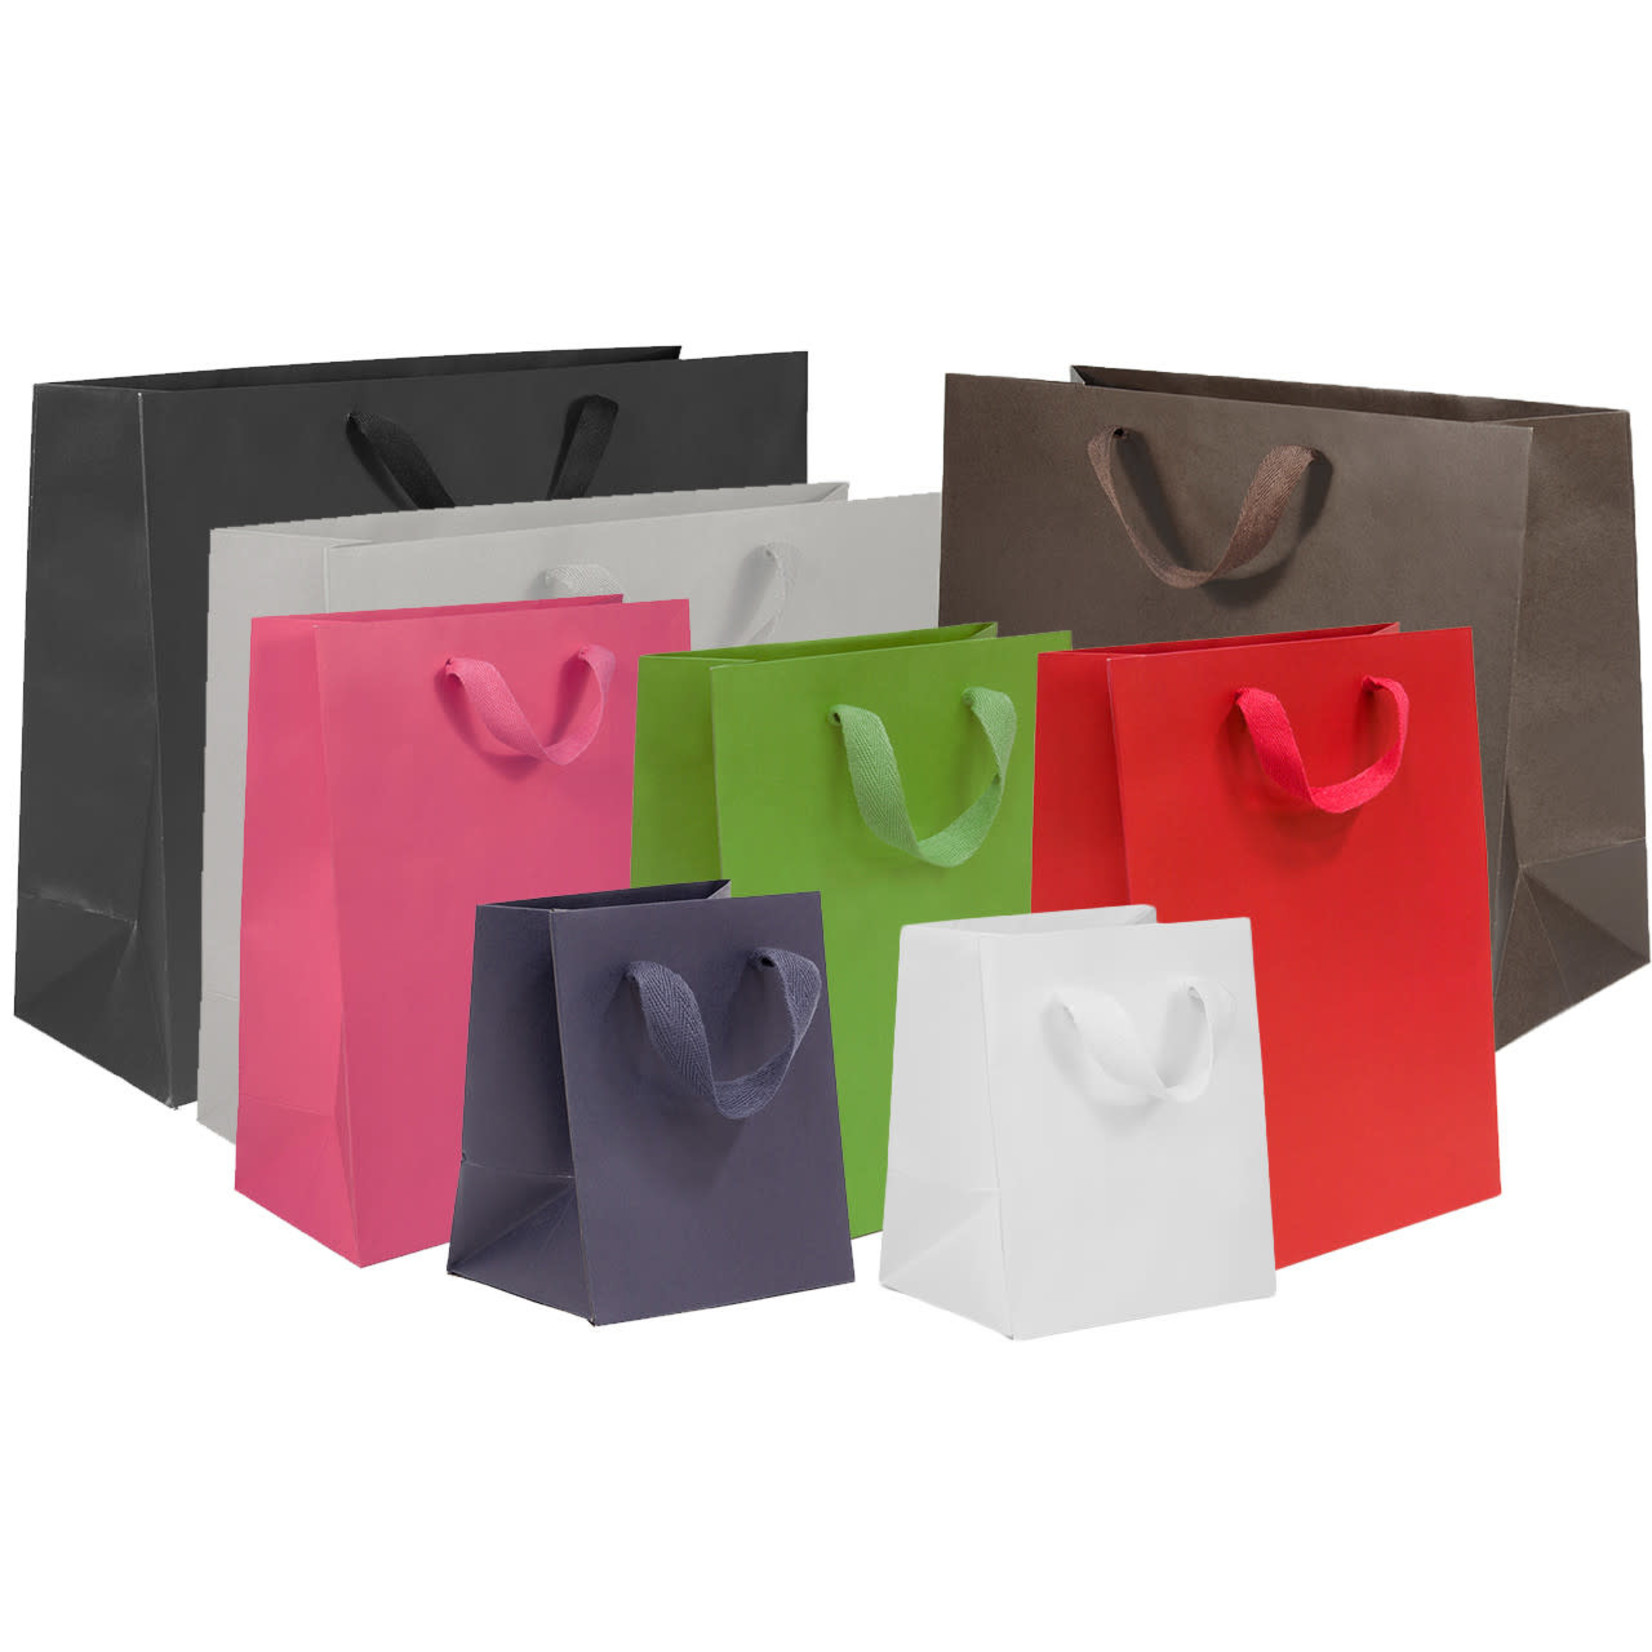 SMALL SURPRISE GIFT BAGS FOR THEM